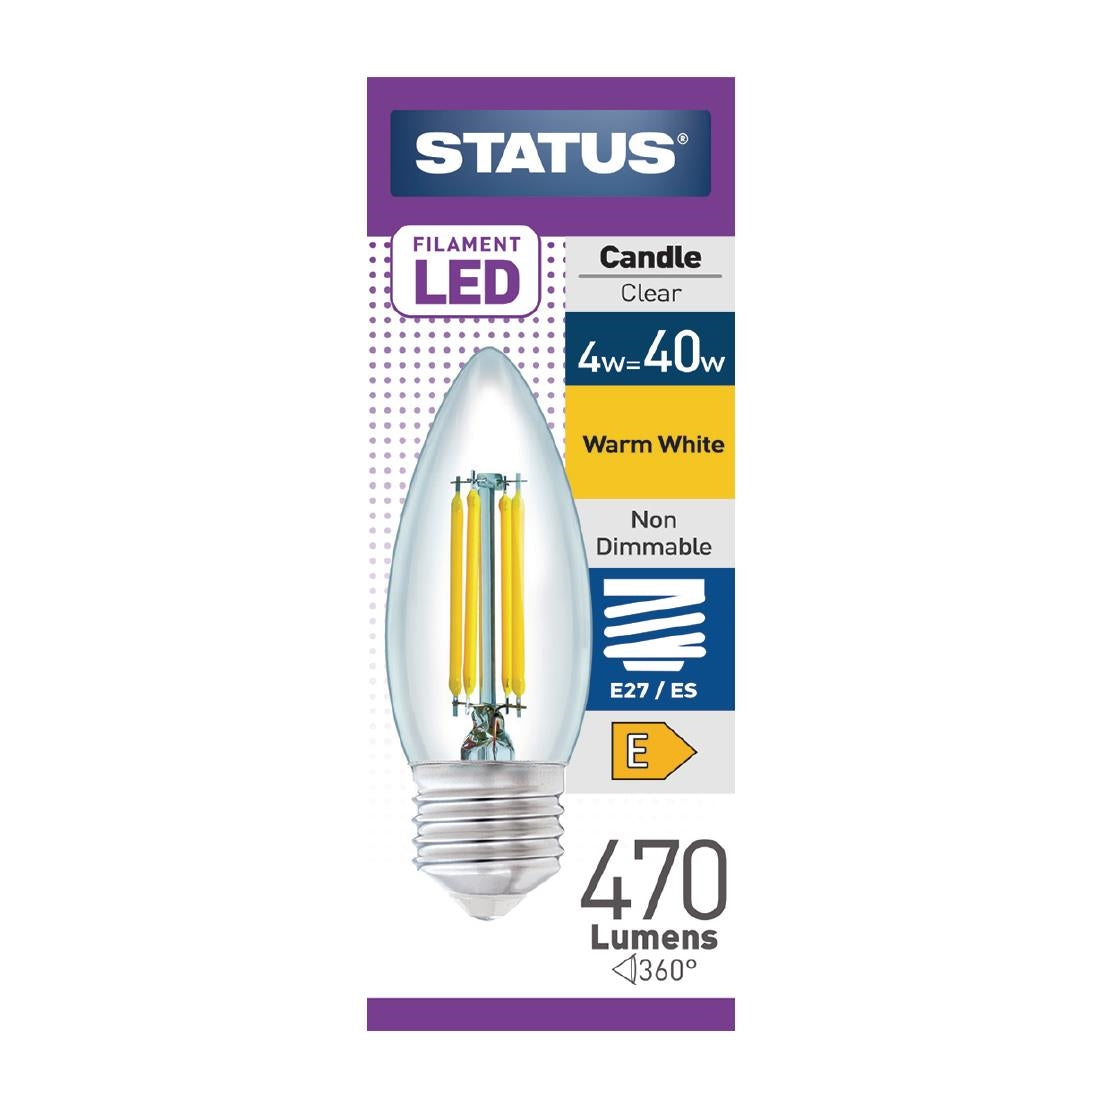 FW520 Status Filament LED Candle ES Warm White Light Bulb 4/40w JD Catering Equipment Solutions Ltd